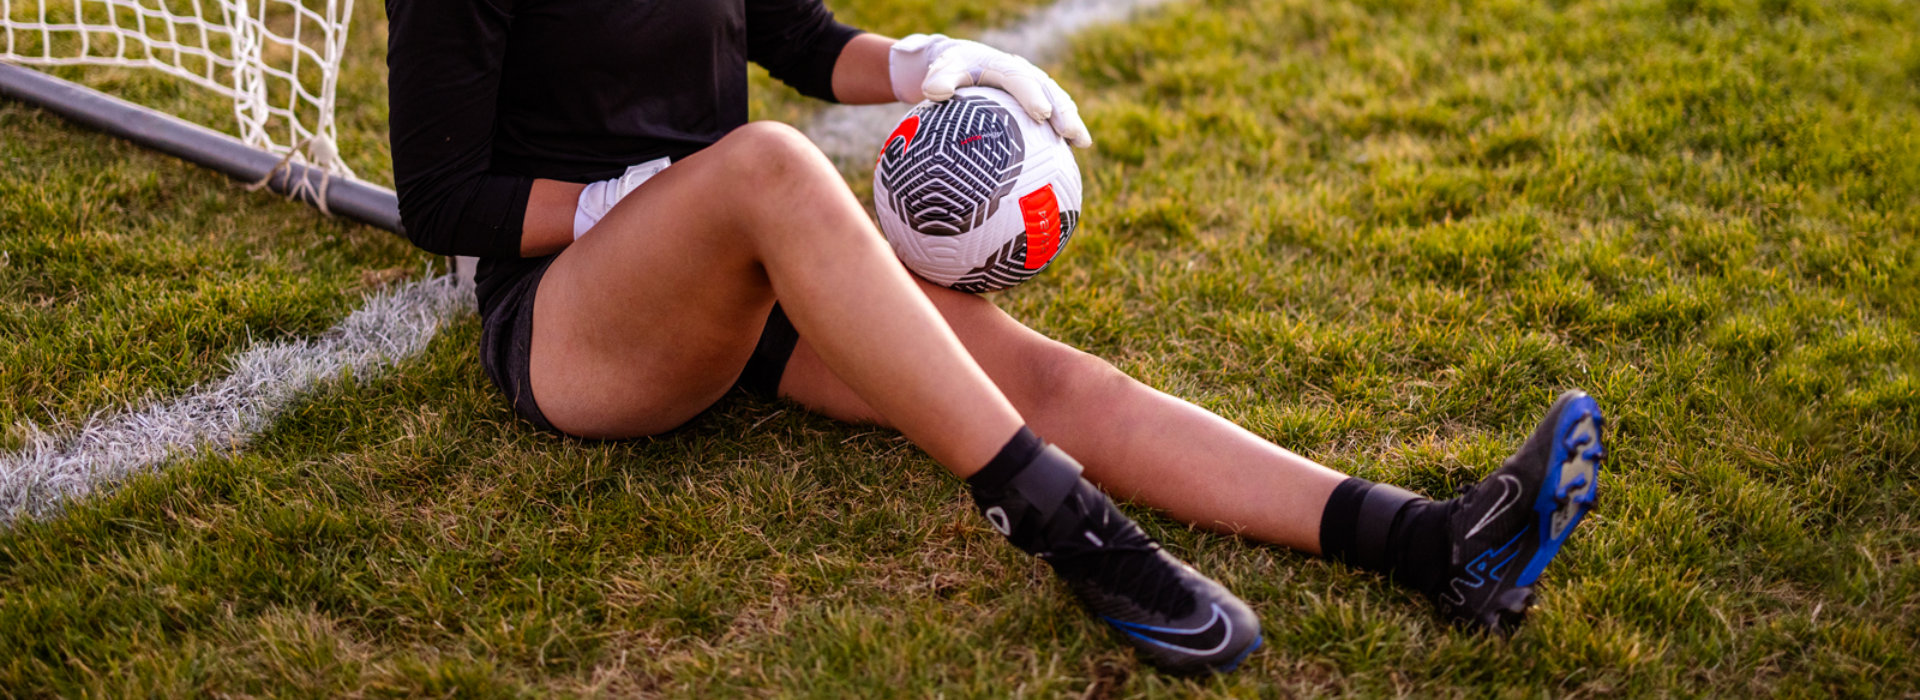 Reduced risk of ankle injury in football with The BetterGuard